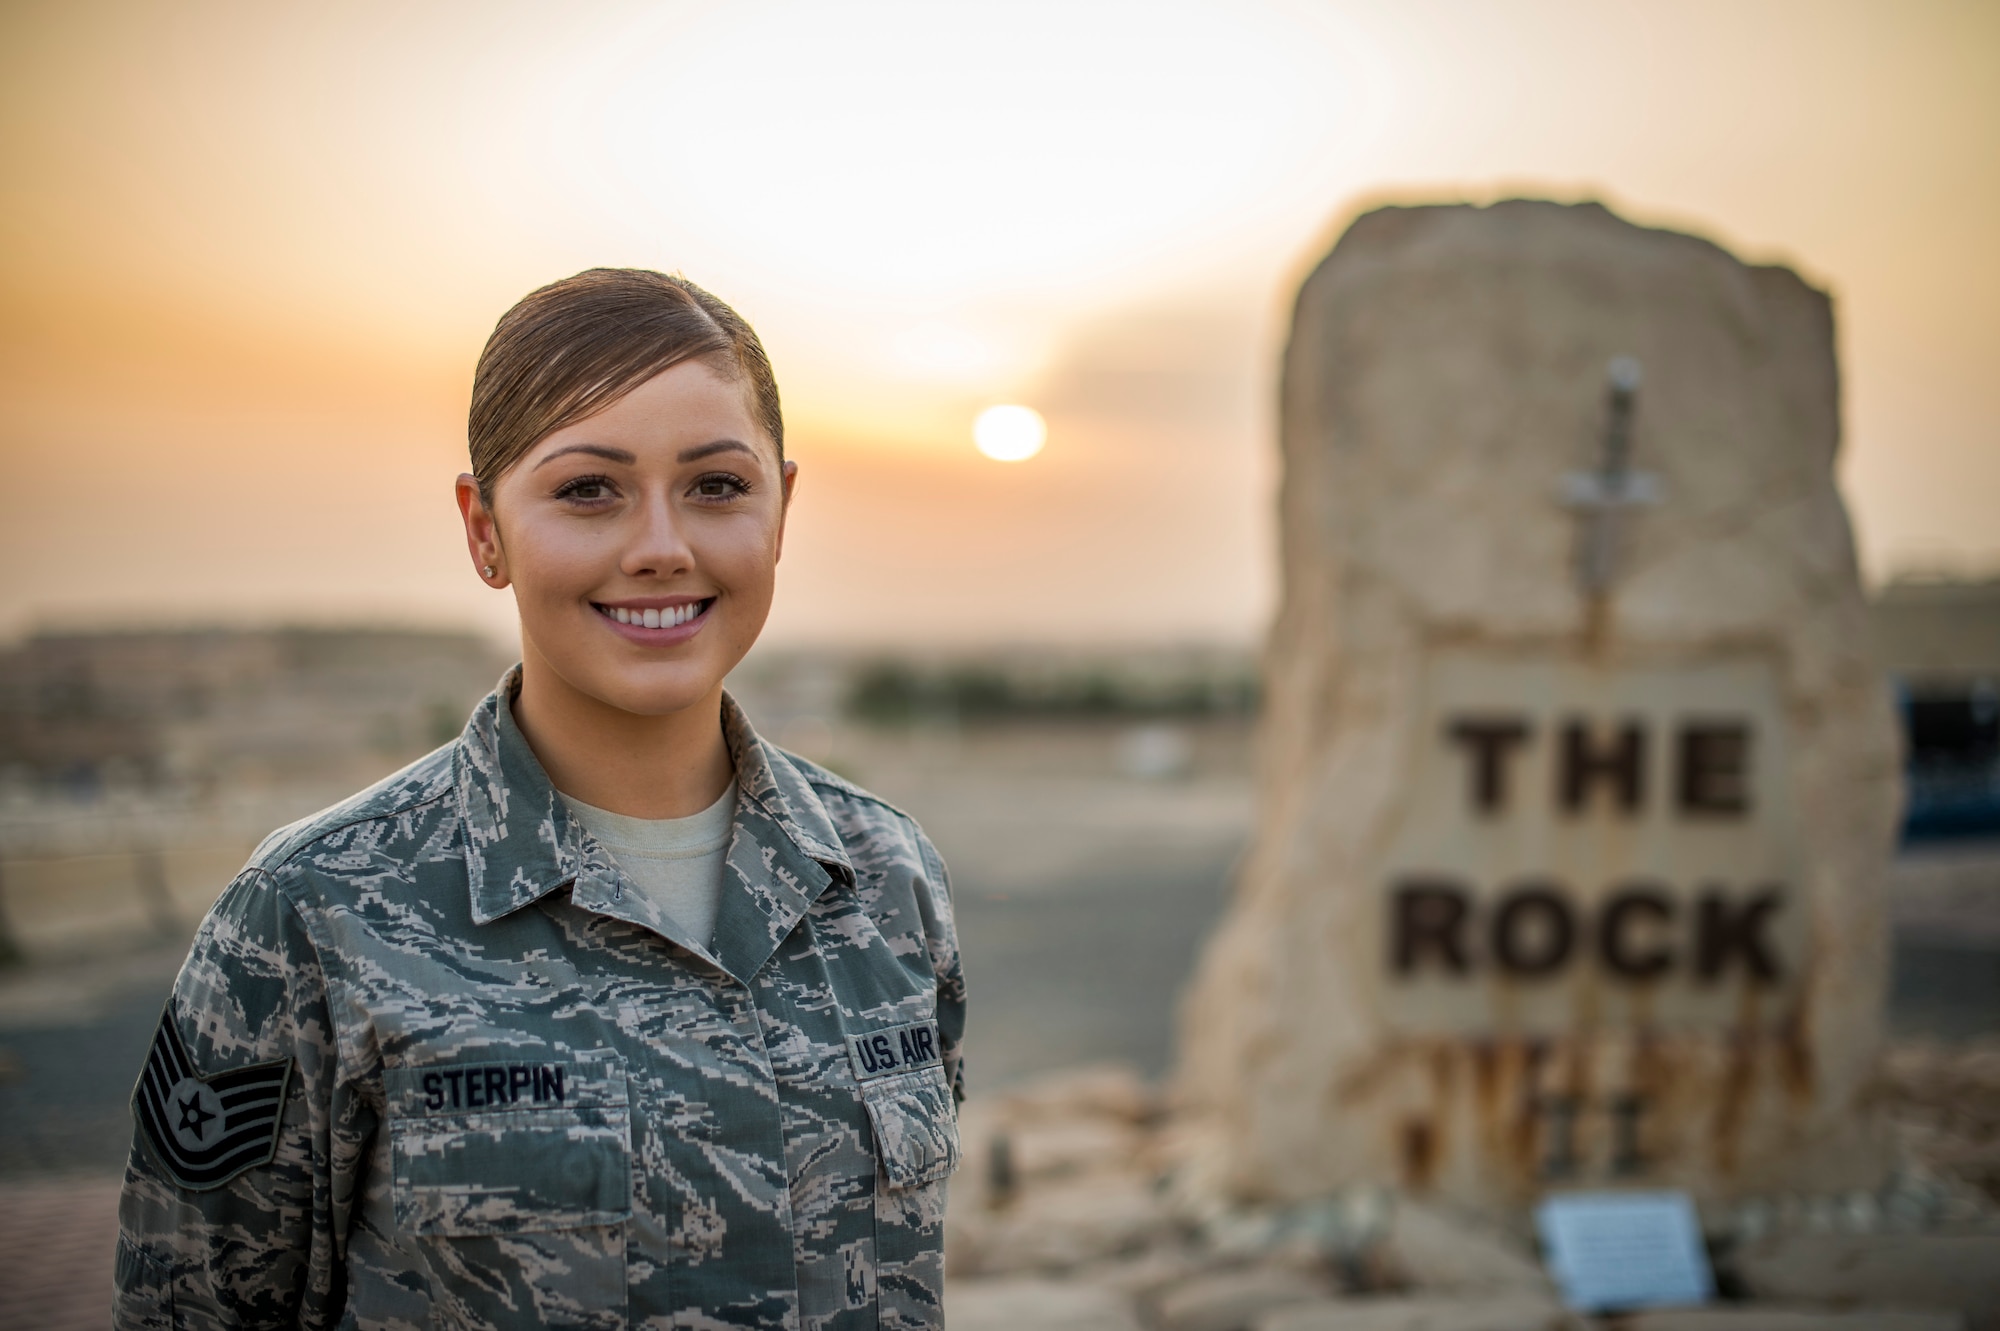 This week's Rock Solid Warrior is Tech. Sgt. Melissa Sterpin. She is a force protection intelligence analyst with the 386th Expeditionary Operations Support Squadron. The Downey, California native is deployed from the 196TH Reconnaissance Squadron, March Joint Air Reserve Base, California. (U.S. Air Force photo by Staff Sgt. Jeremy Bowcock)

